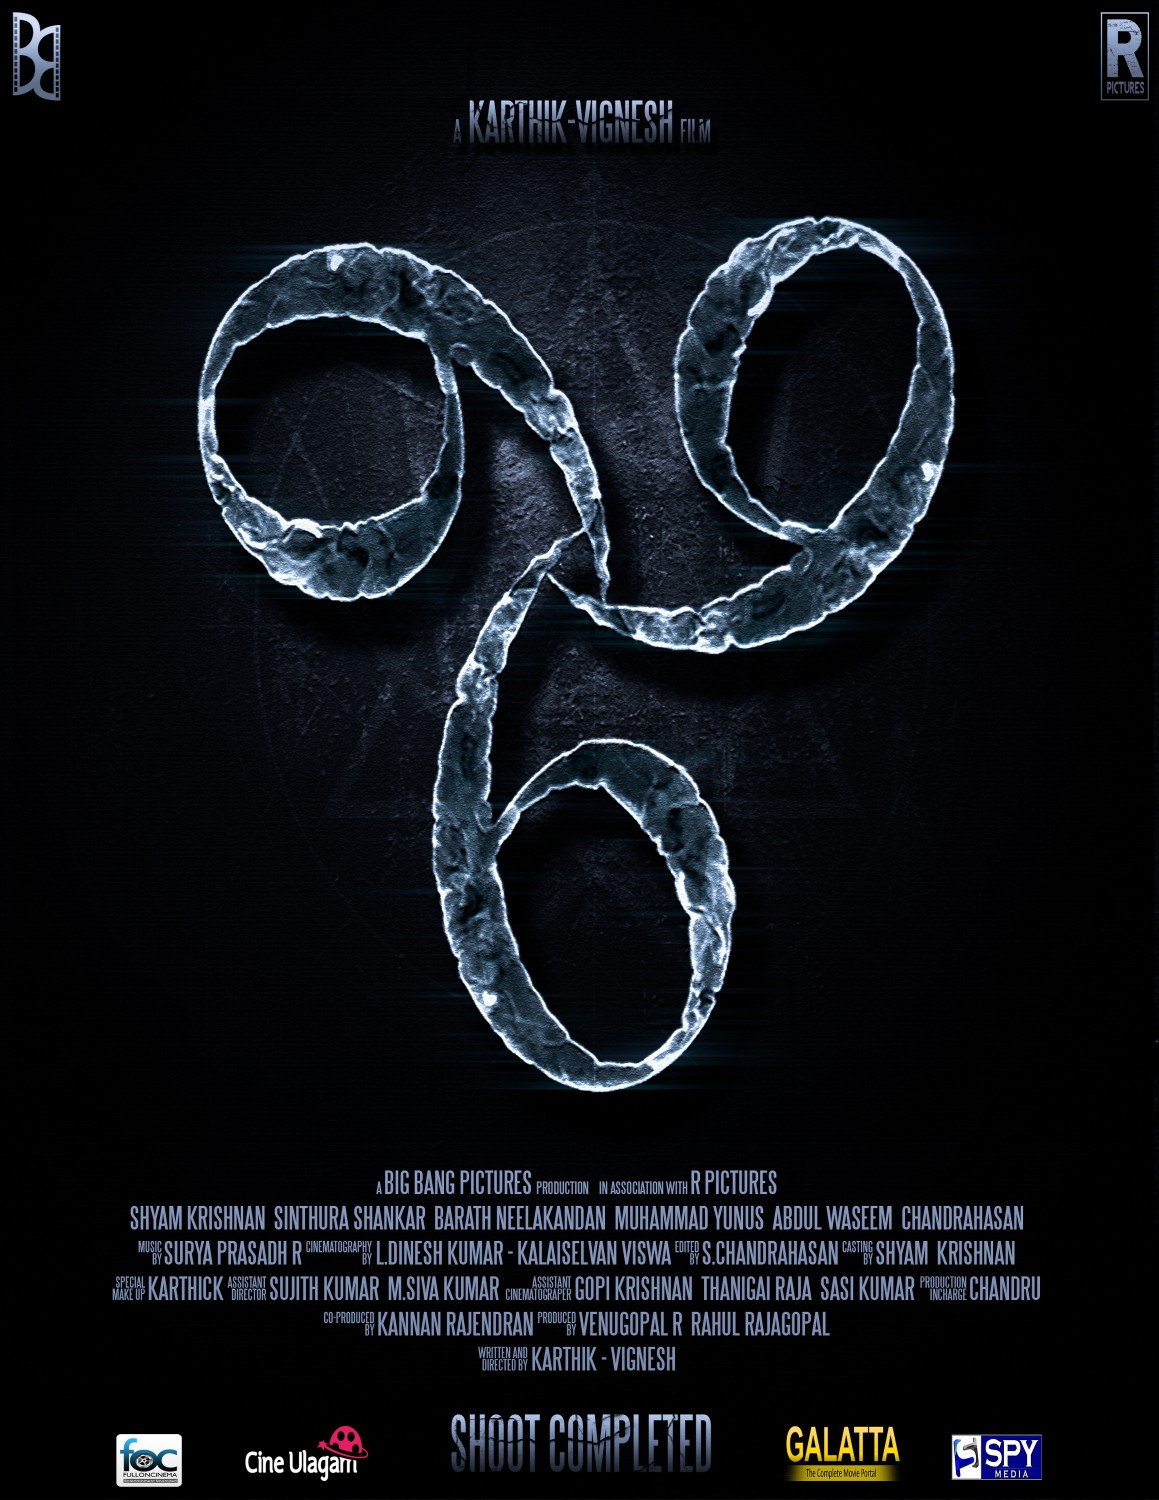 Extra Large Movie Poster Image for 666